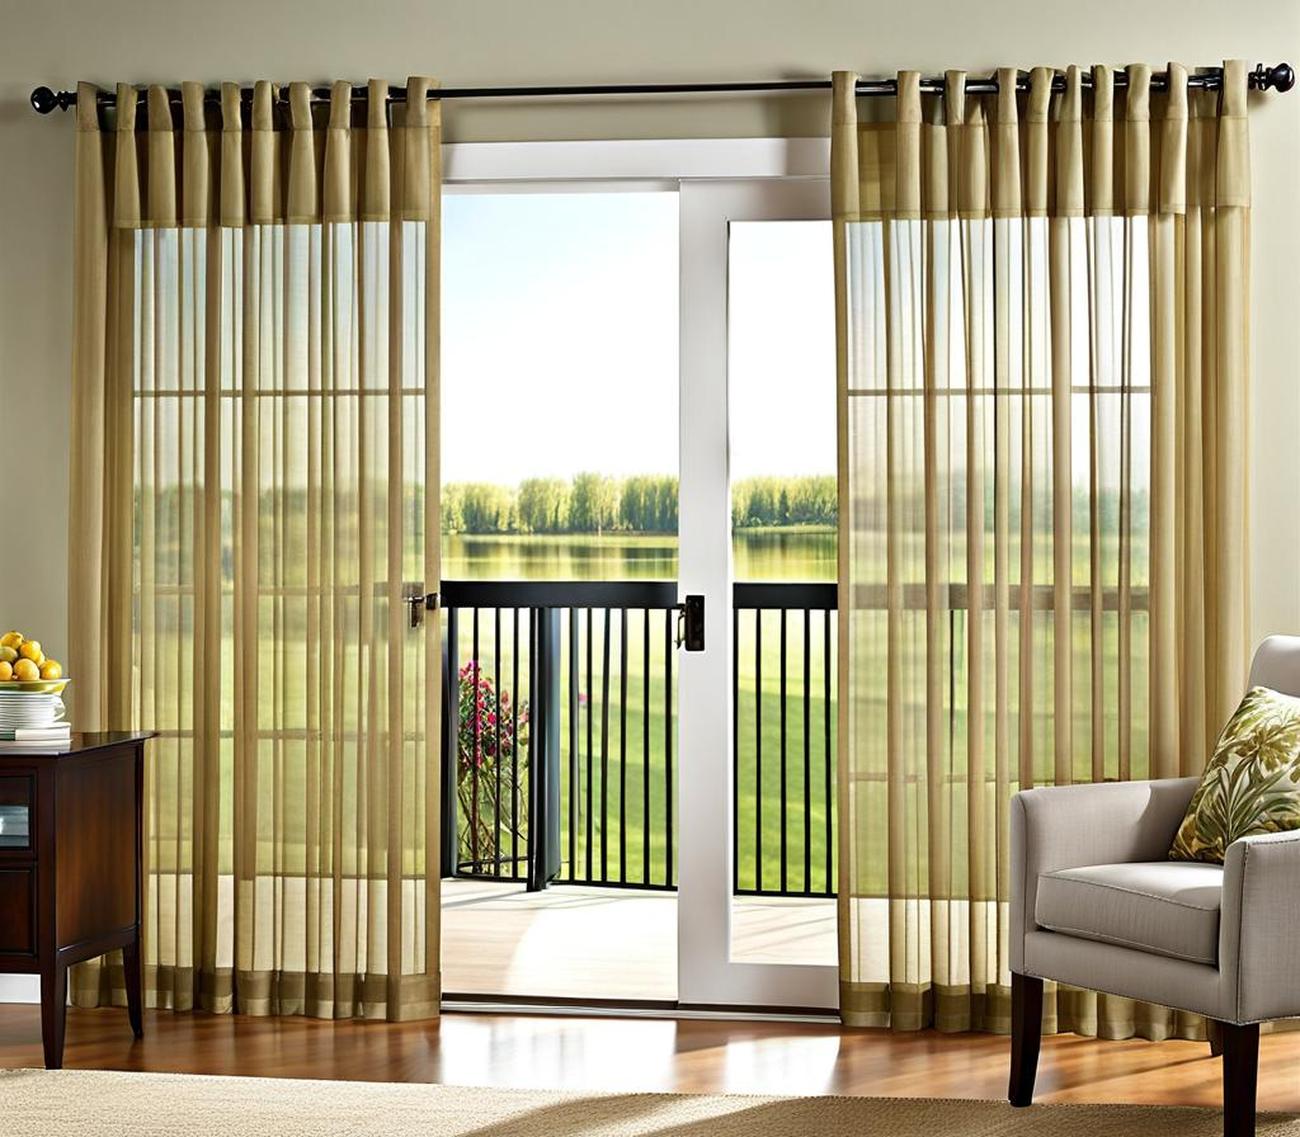 Find the Right Sheer Curtains to Perfect Your Sliding Glass Doors